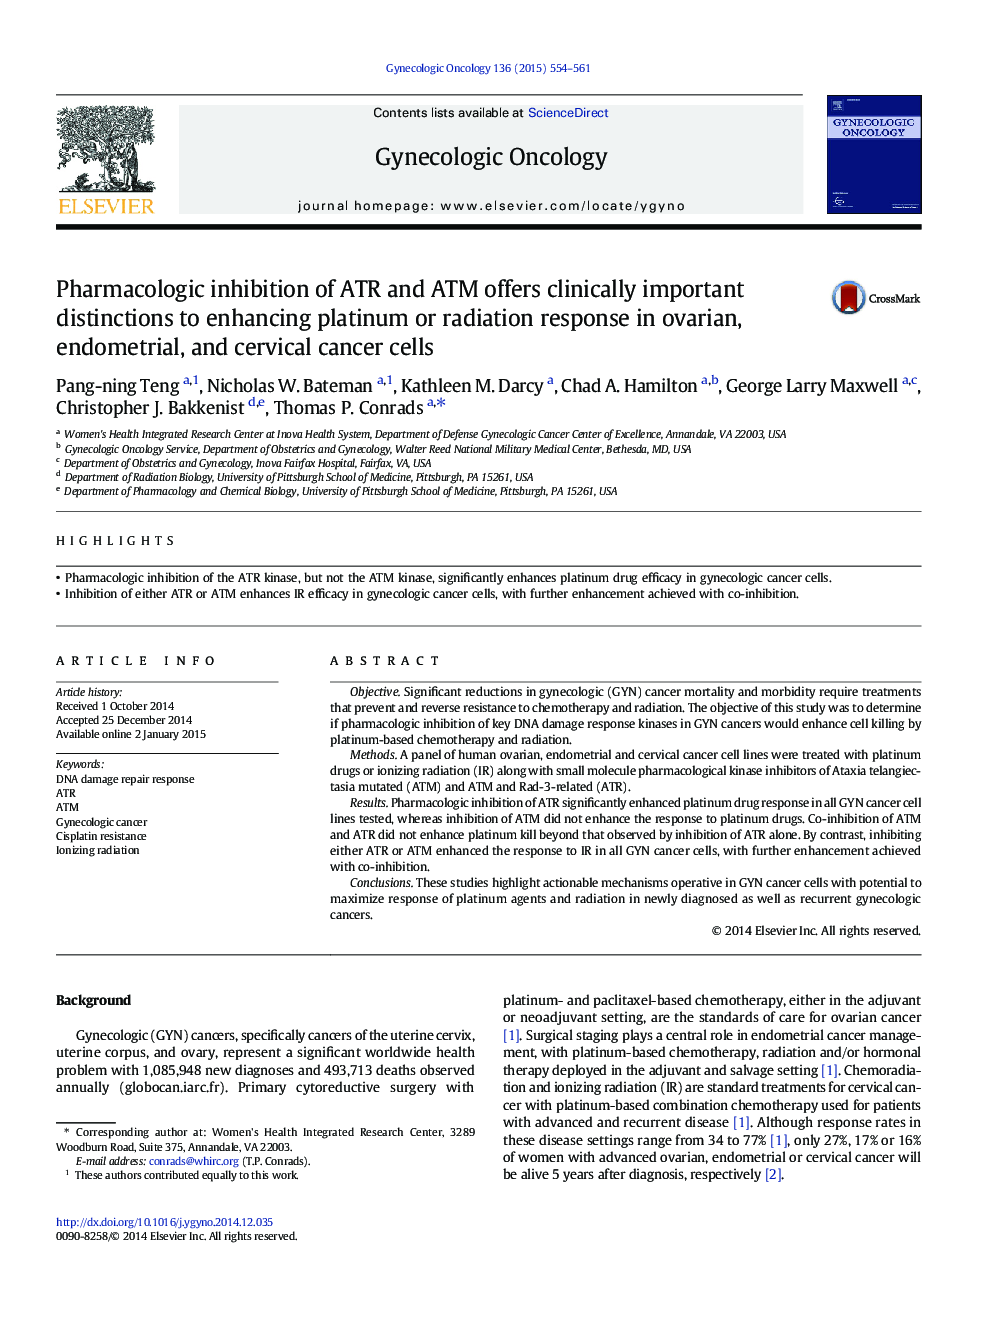 Pharmacologic inhibition of ATR and ATM offers clinically important distinctions to enhancing platinum or radiation response in ovarian, endometrial, and cervical cancer cells